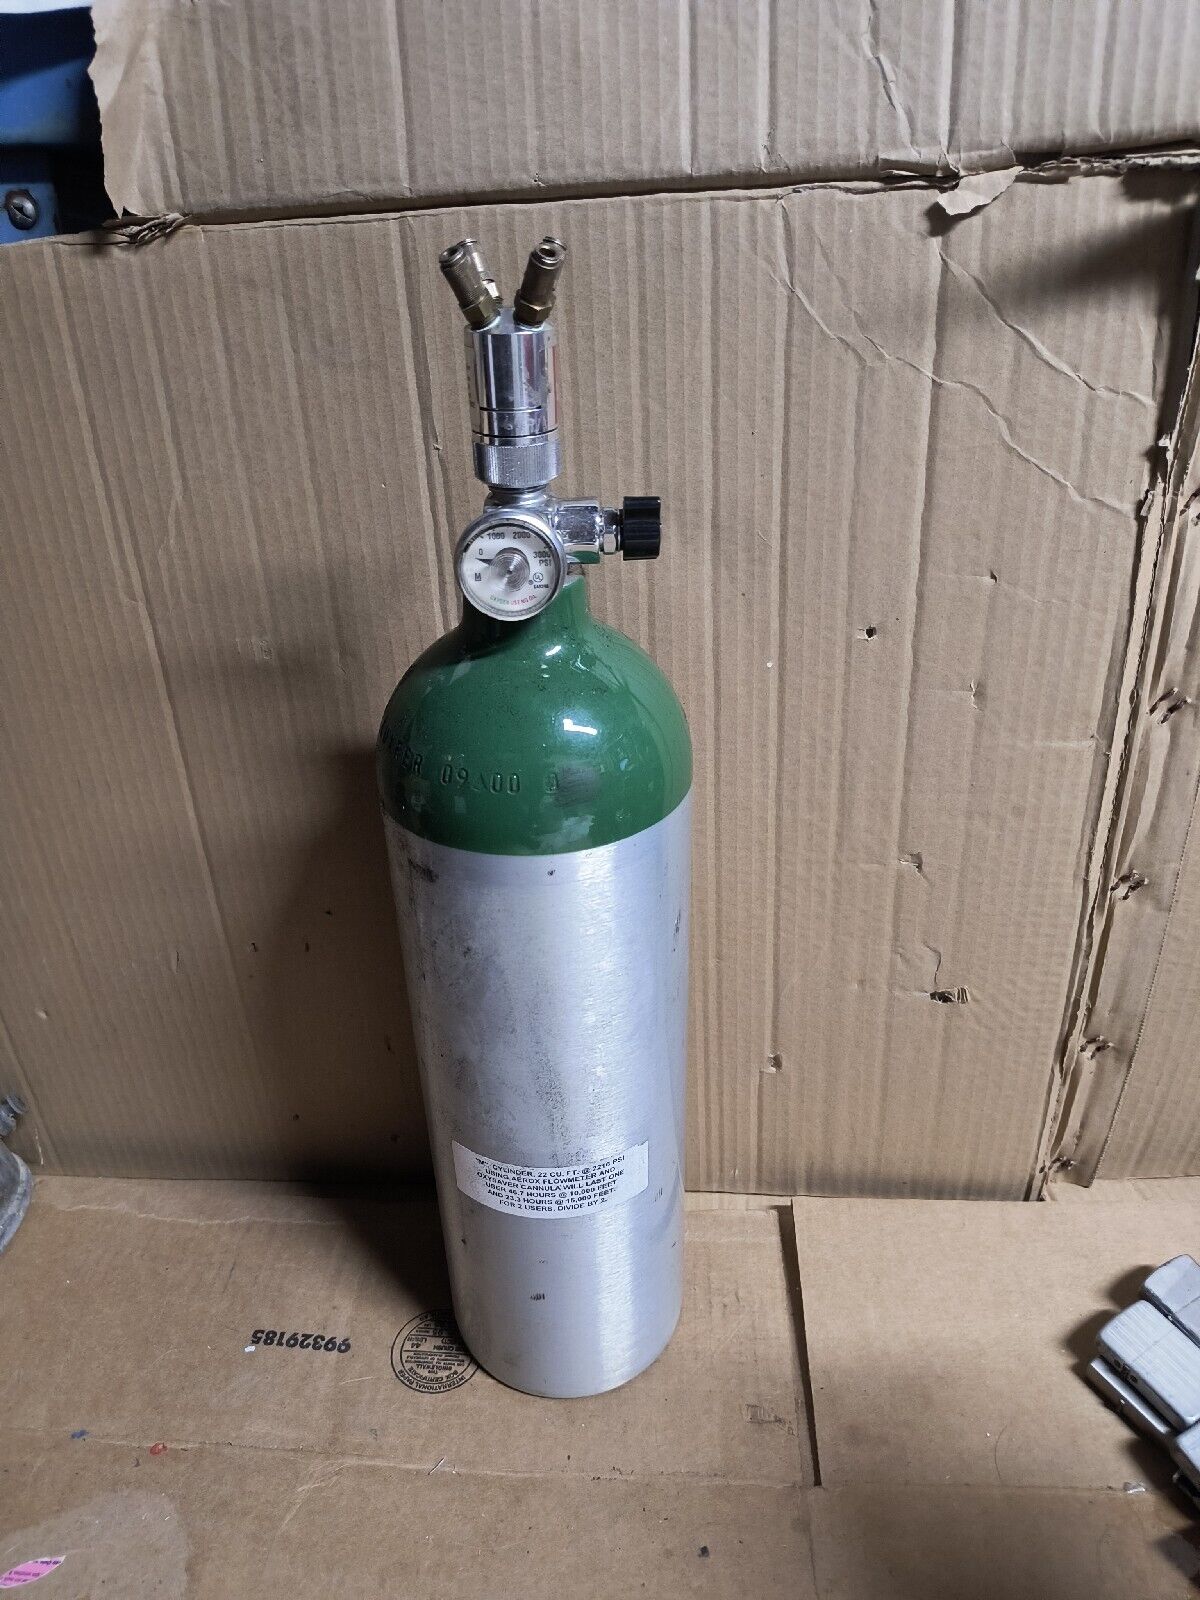 Size M Aerox Aviation Oxygen Systems, Inc. Emergency 4 Connection Valve Used